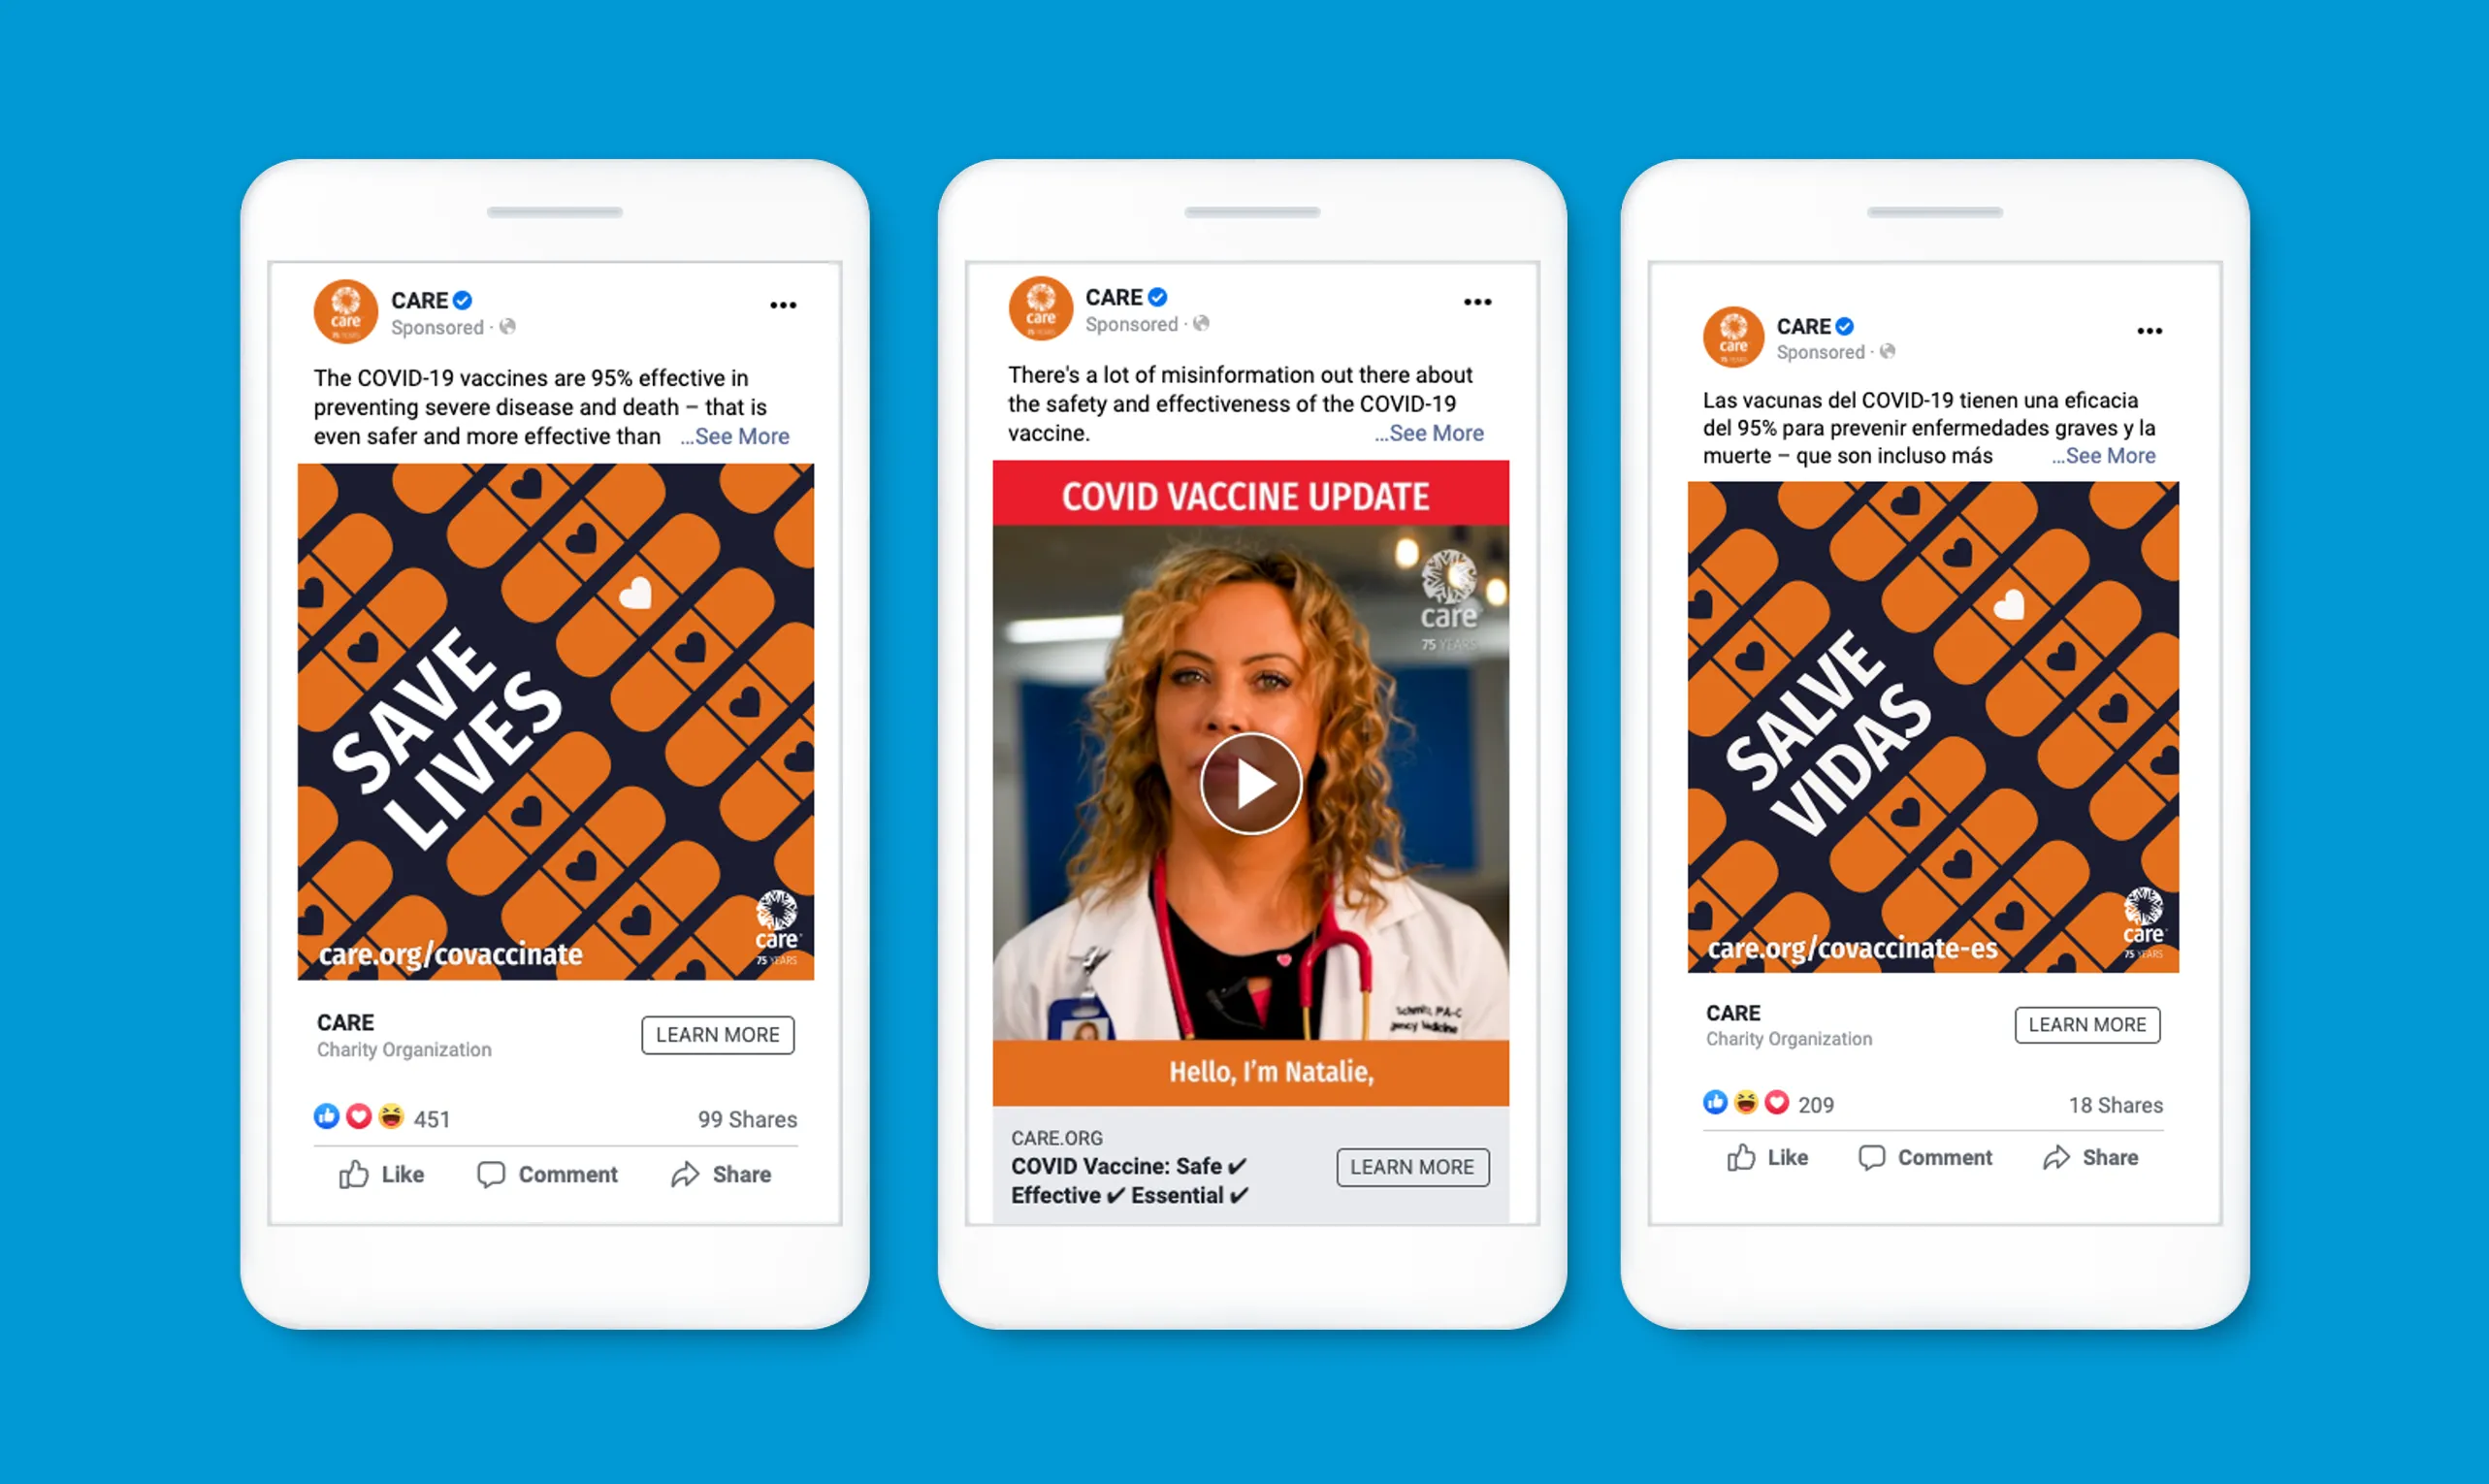 Three mockups of sample Facebook image and video posts on iPhones on a bright blue background.